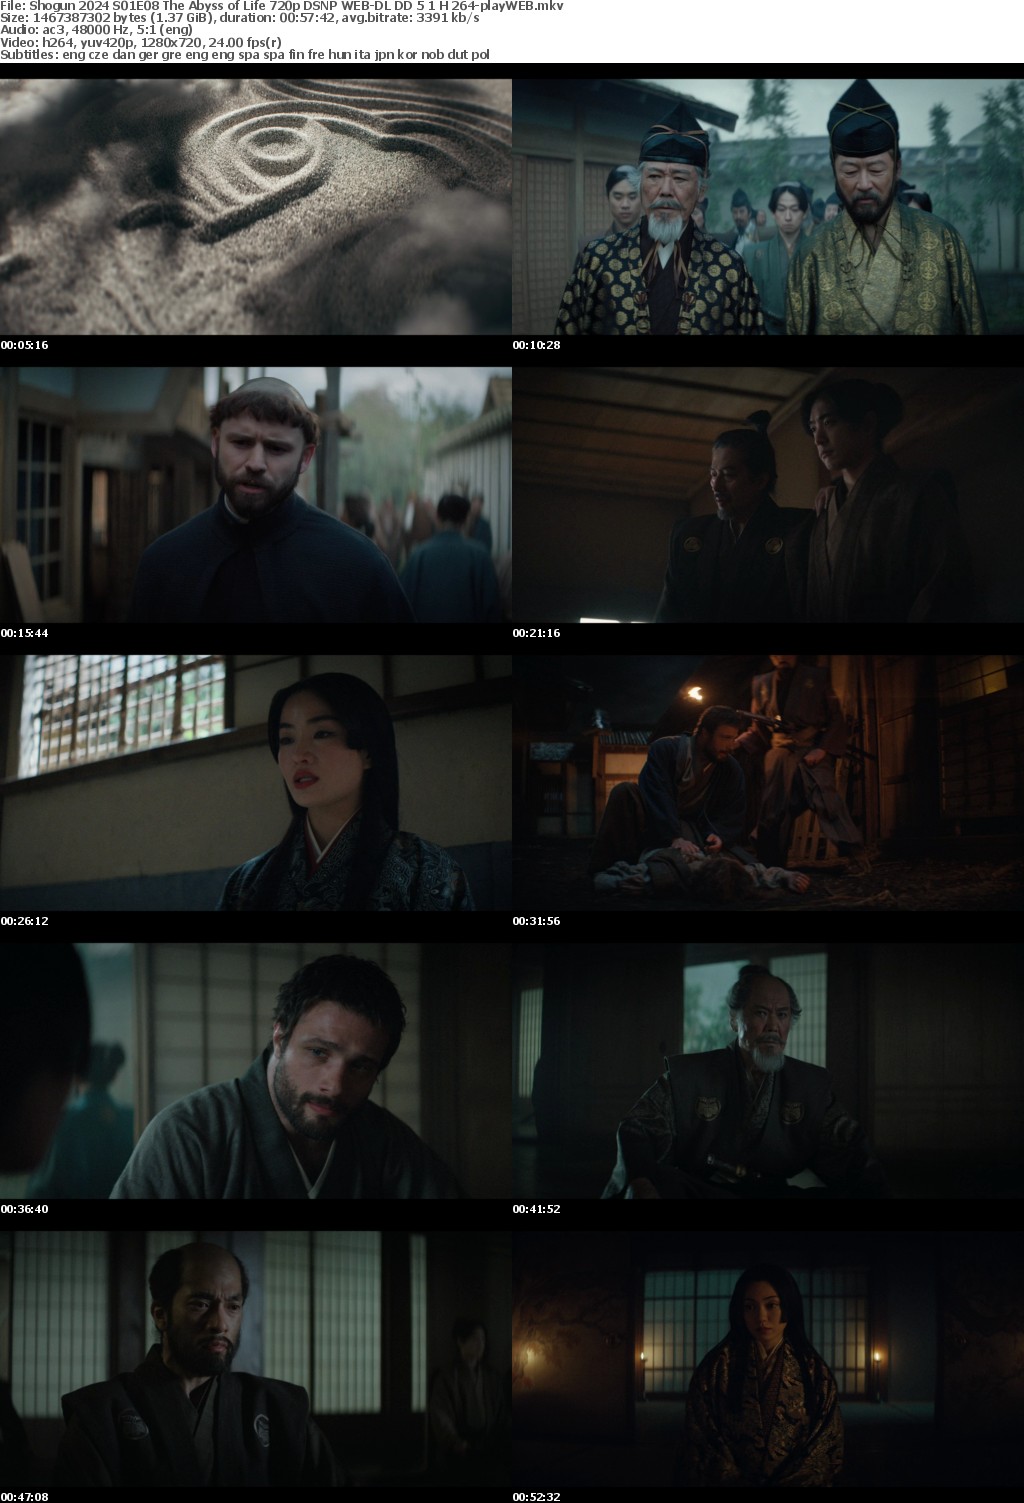 Shogun 2024 S01E08 The Abyss of Life 720p DSNP WEB-DL DD 5 1 H 264-playWEB